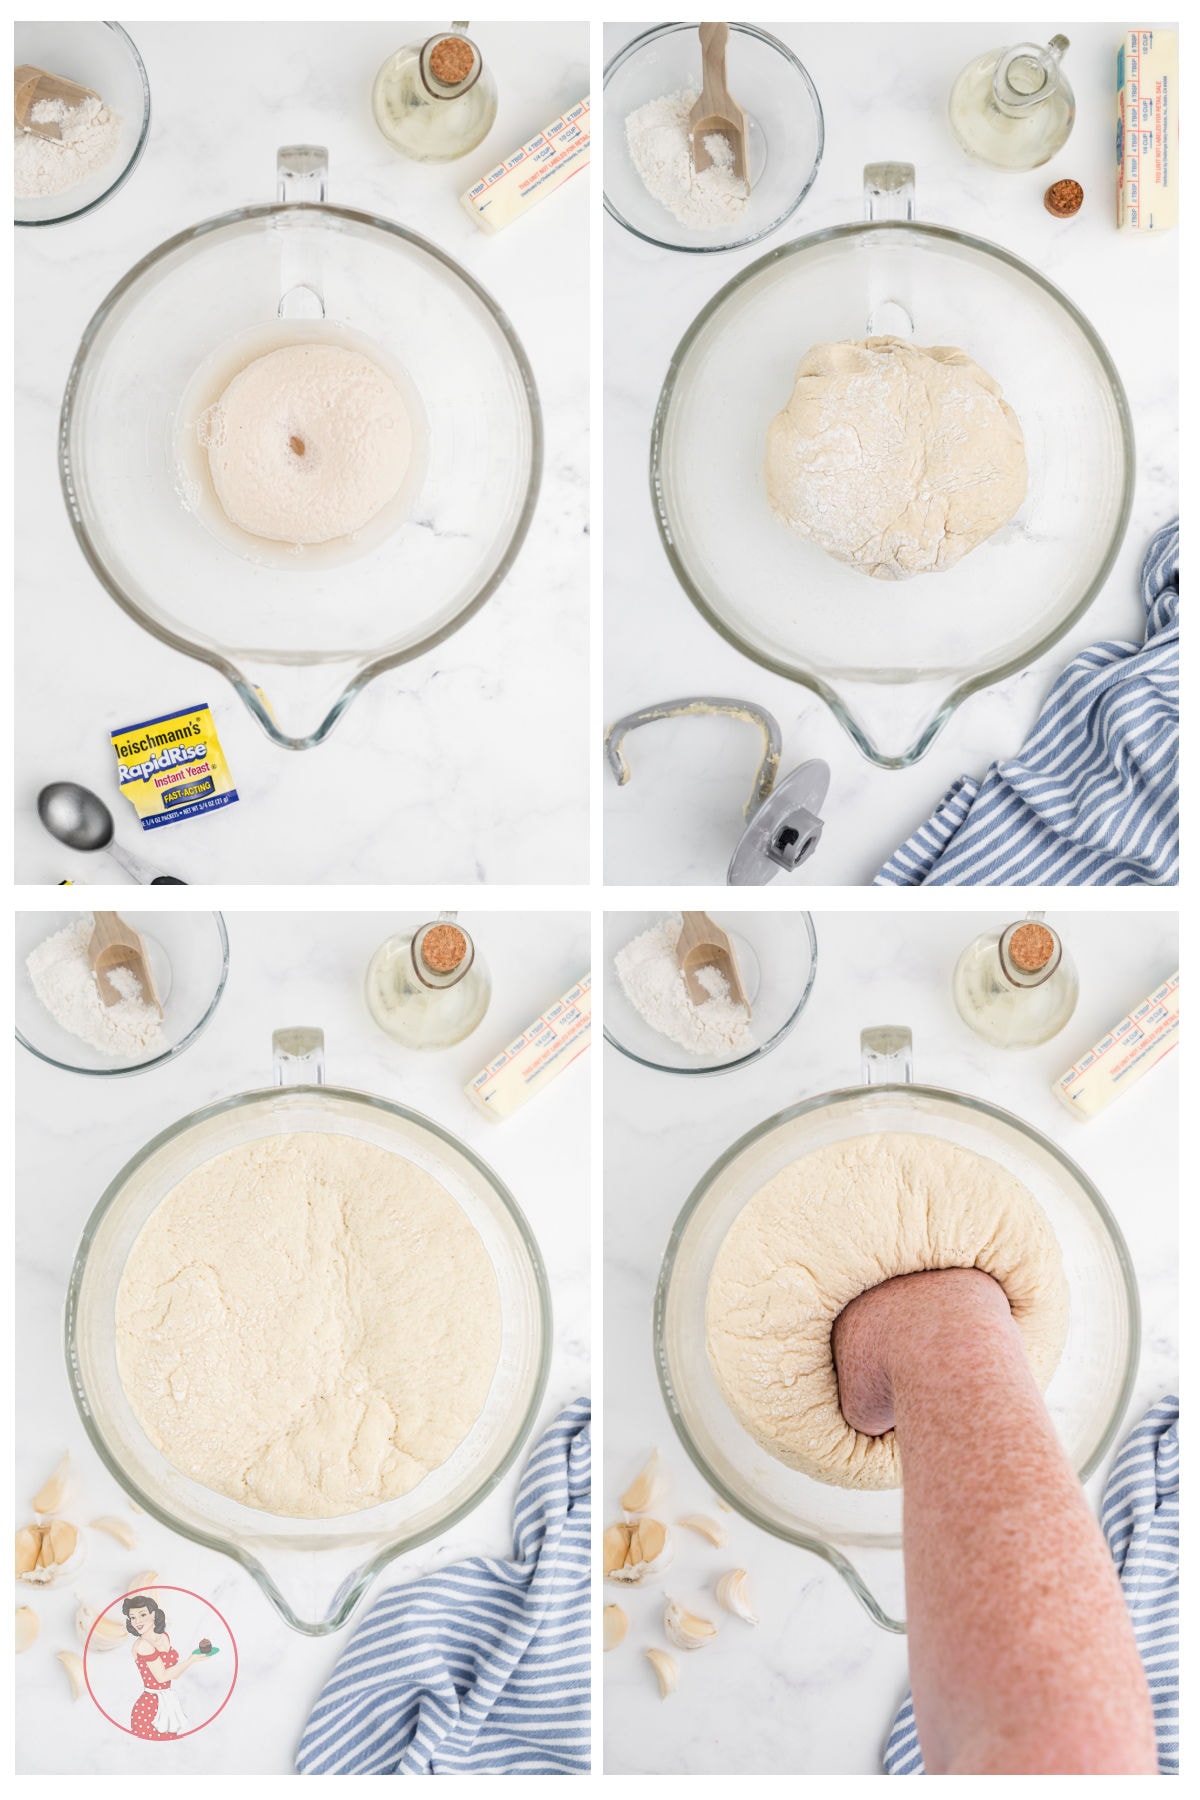 A collage of images showing how to mix yeast dough.